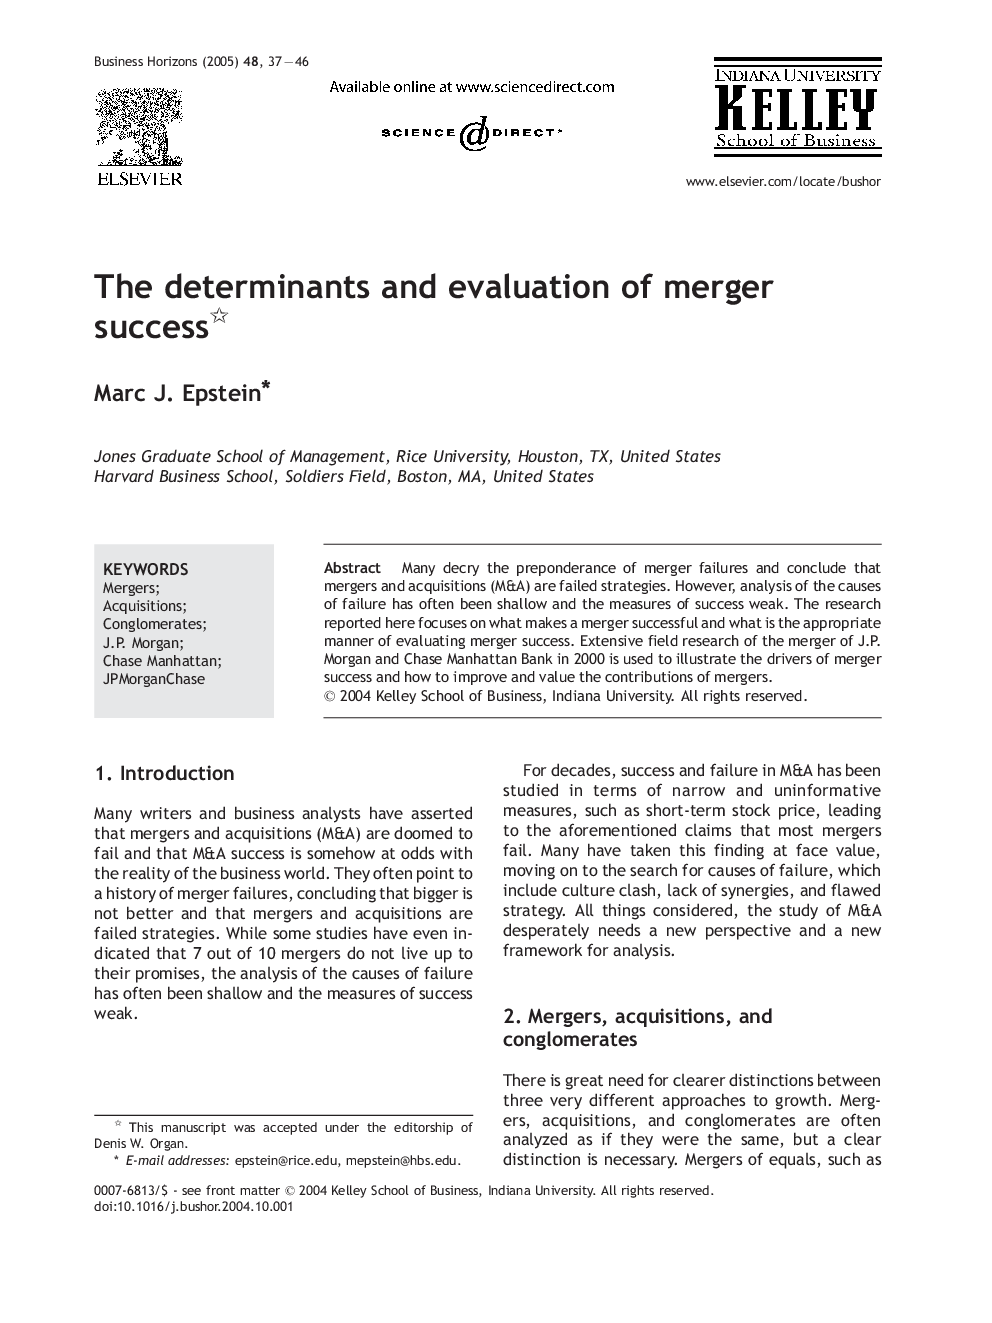 The determinants and evaluation of merger success